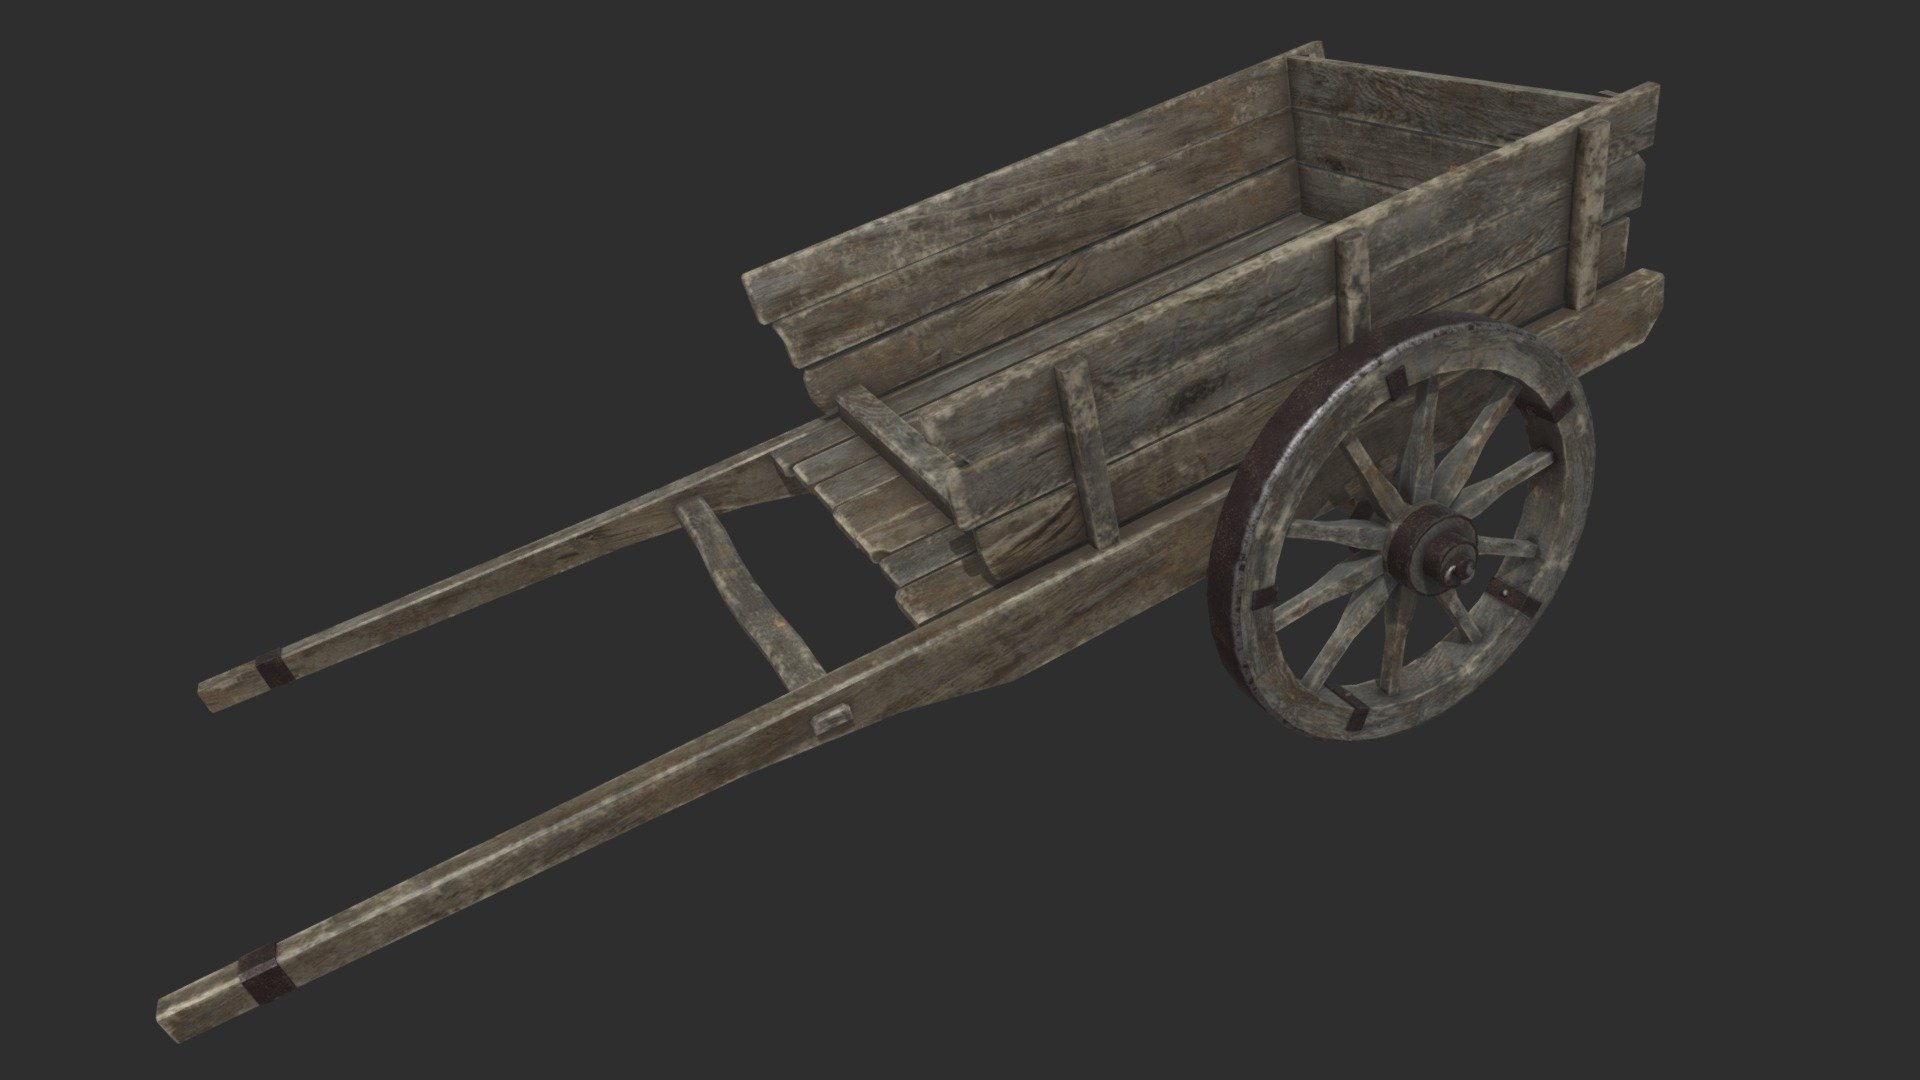 Low poly medieval cart. Ready for game.

Polygons 2097.

Texture Resolution 4096.
Unity set:
- Albedo
- Metallic
- Normal
- Occusion - Cart - 3D model by SoulTear 3d model